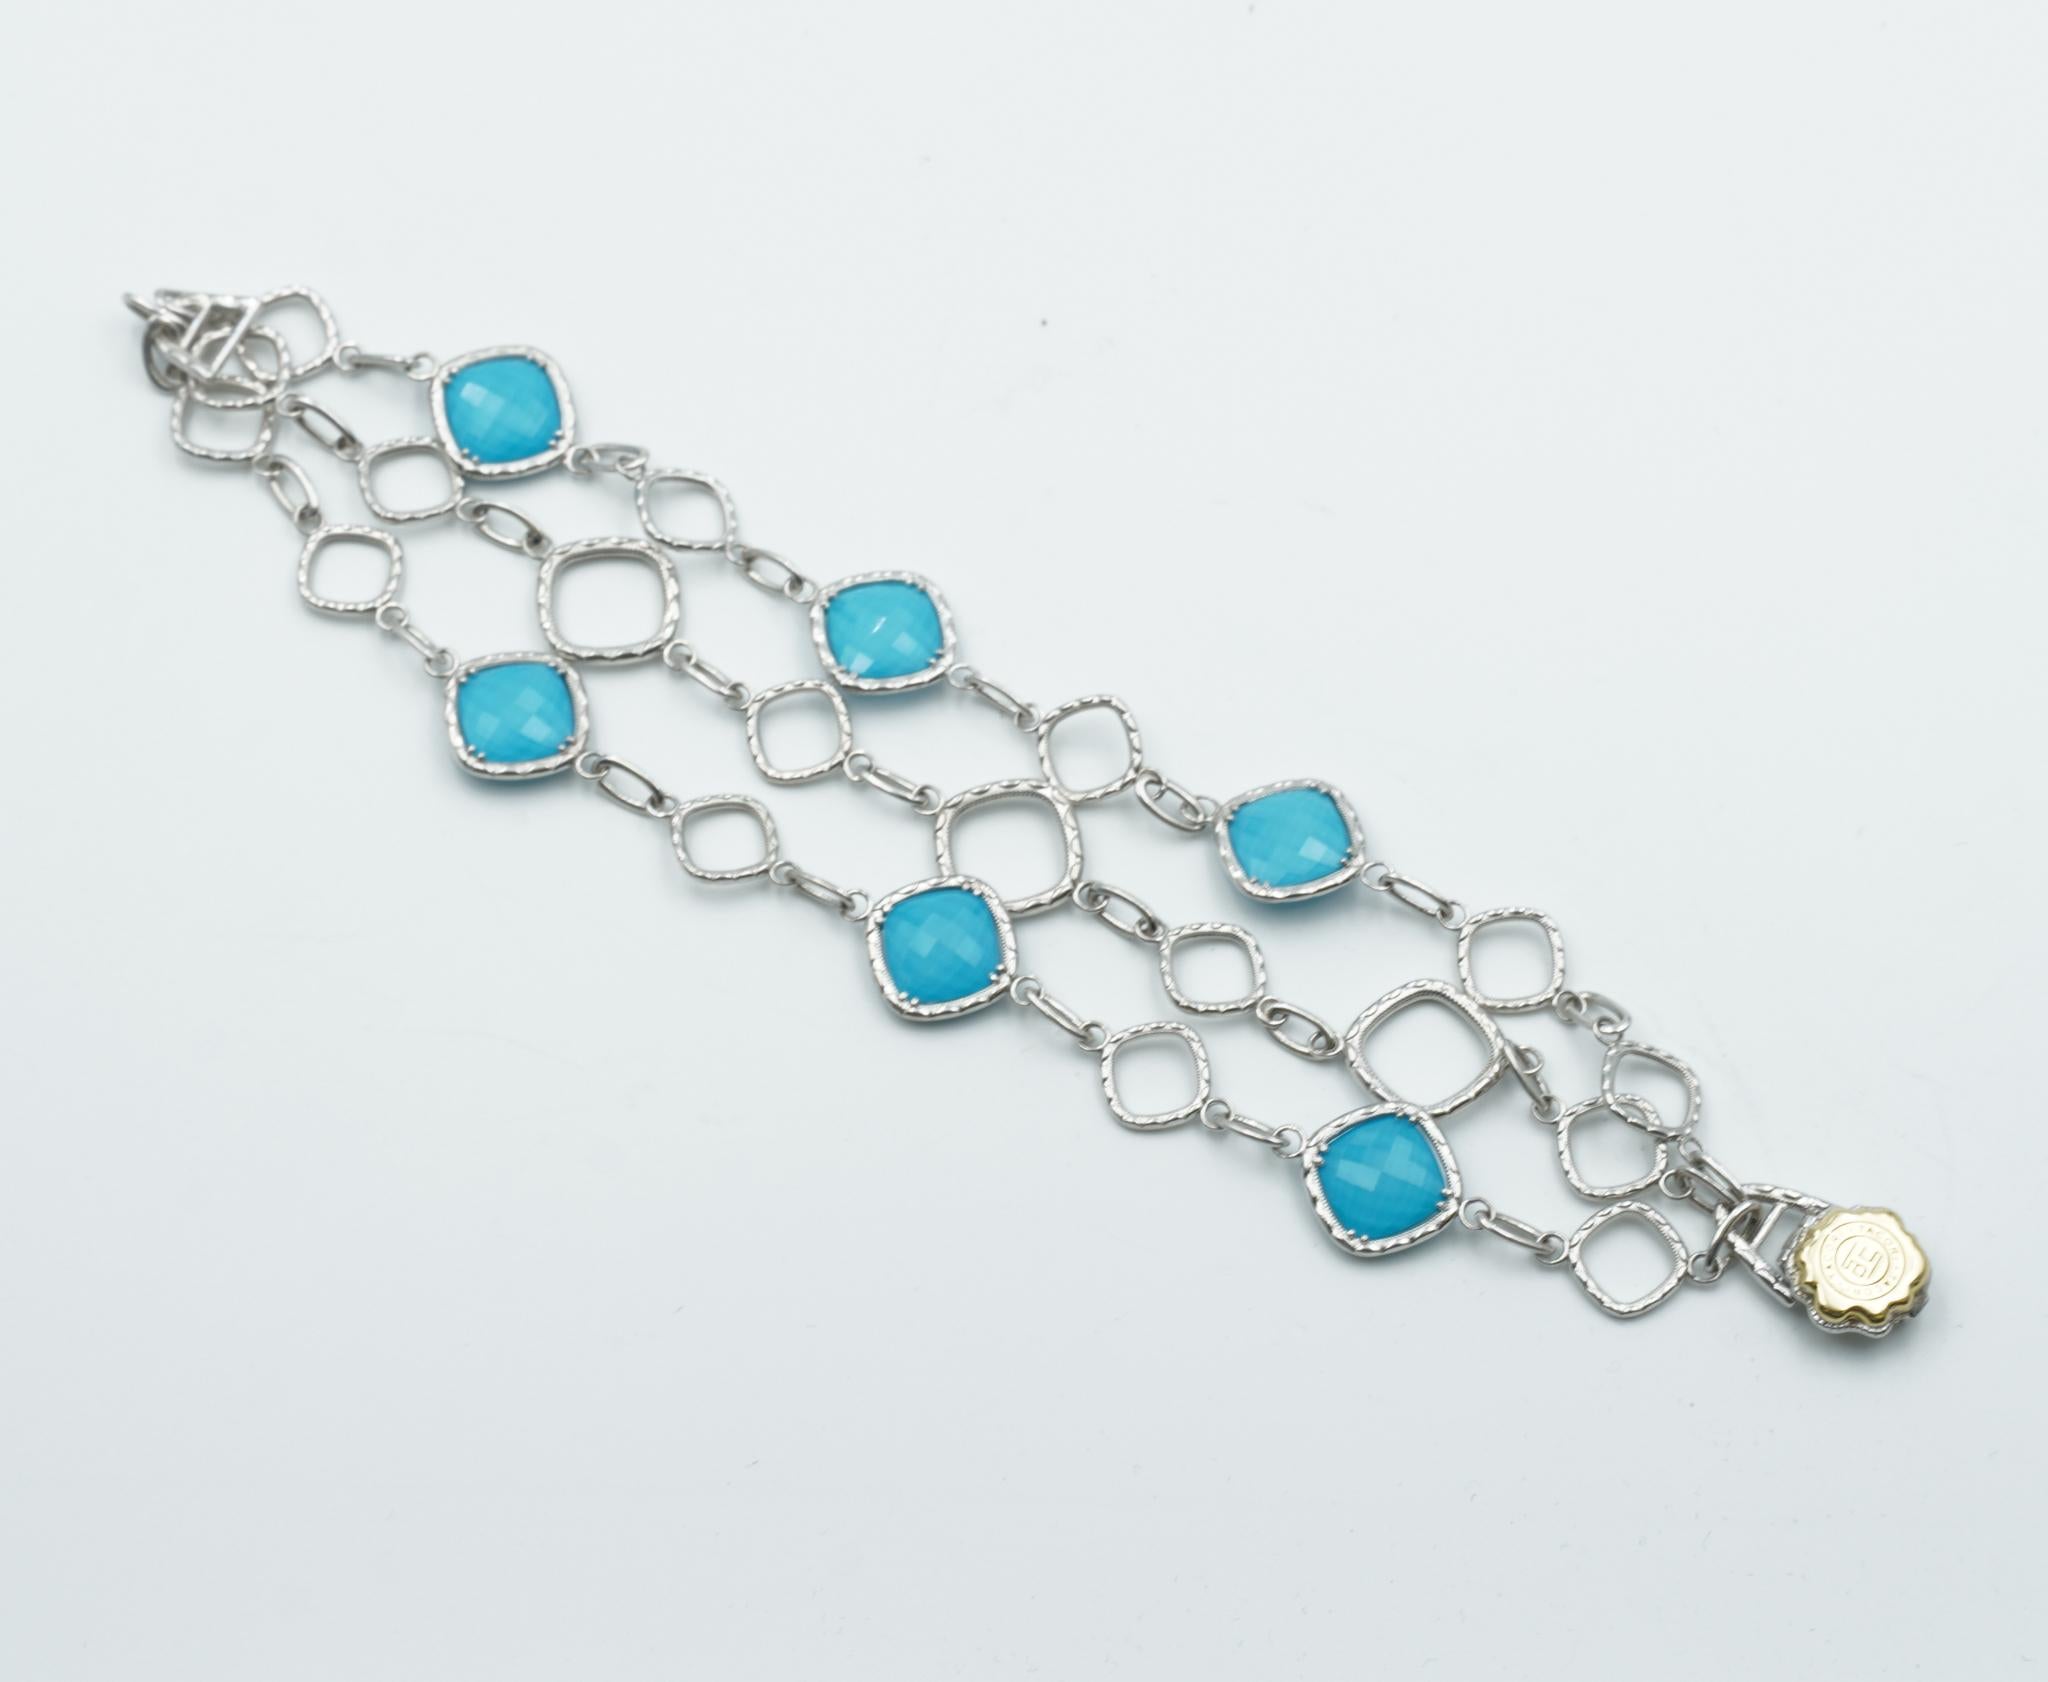 Faceted Clear Quartz is layered over Neolite Turquoise and set within the diamond-shaped links of this triple strand bracelet; fastened into luxe swoops of silver with an 18kt gold Tacori gem seal. Brand new. Handcrafted with extraordinary care by